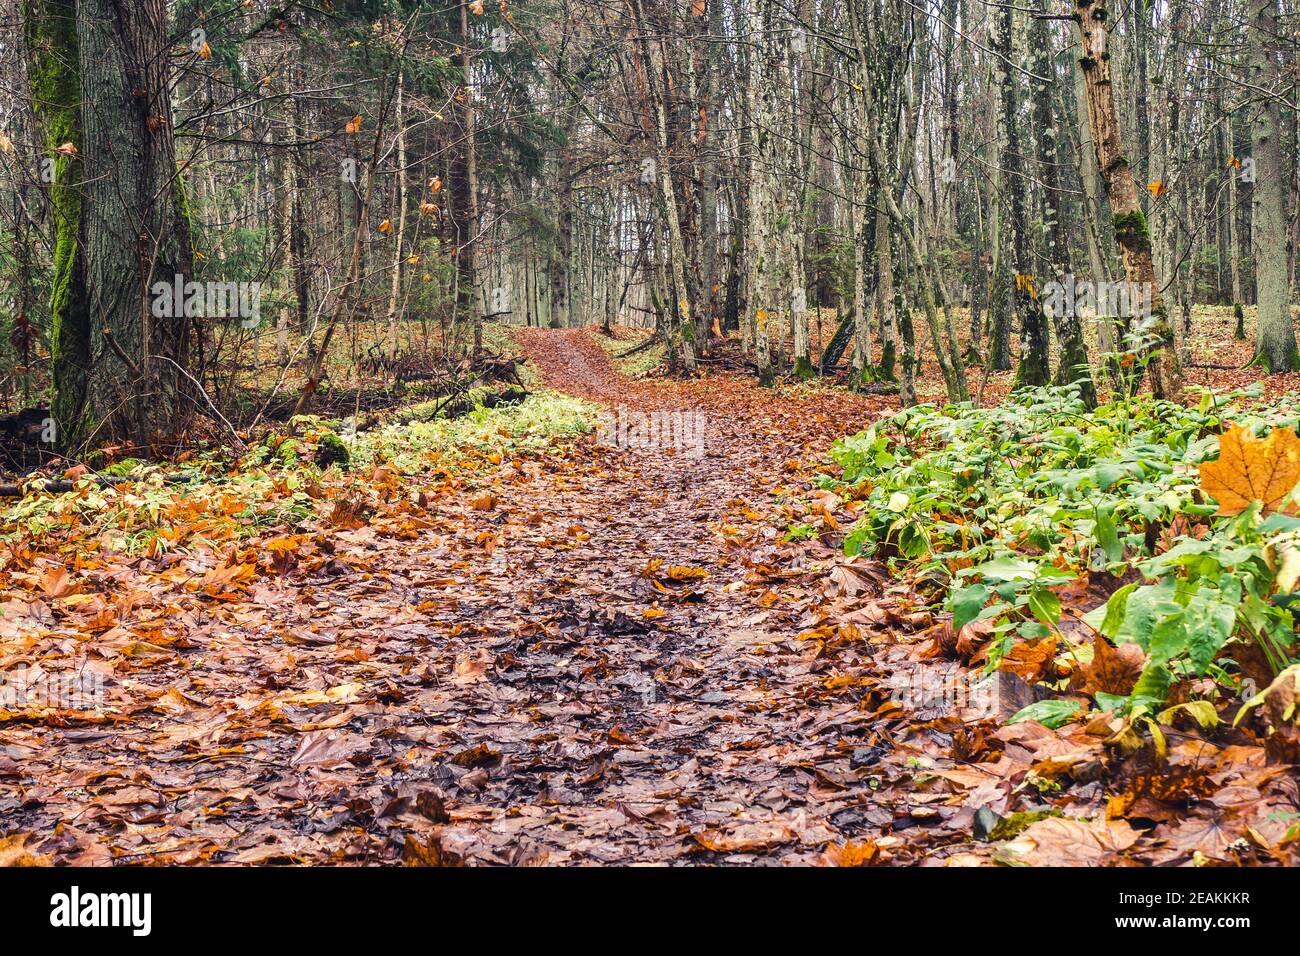 Autumn Forest Scenery with Road of Fall Leaves Stock Photo